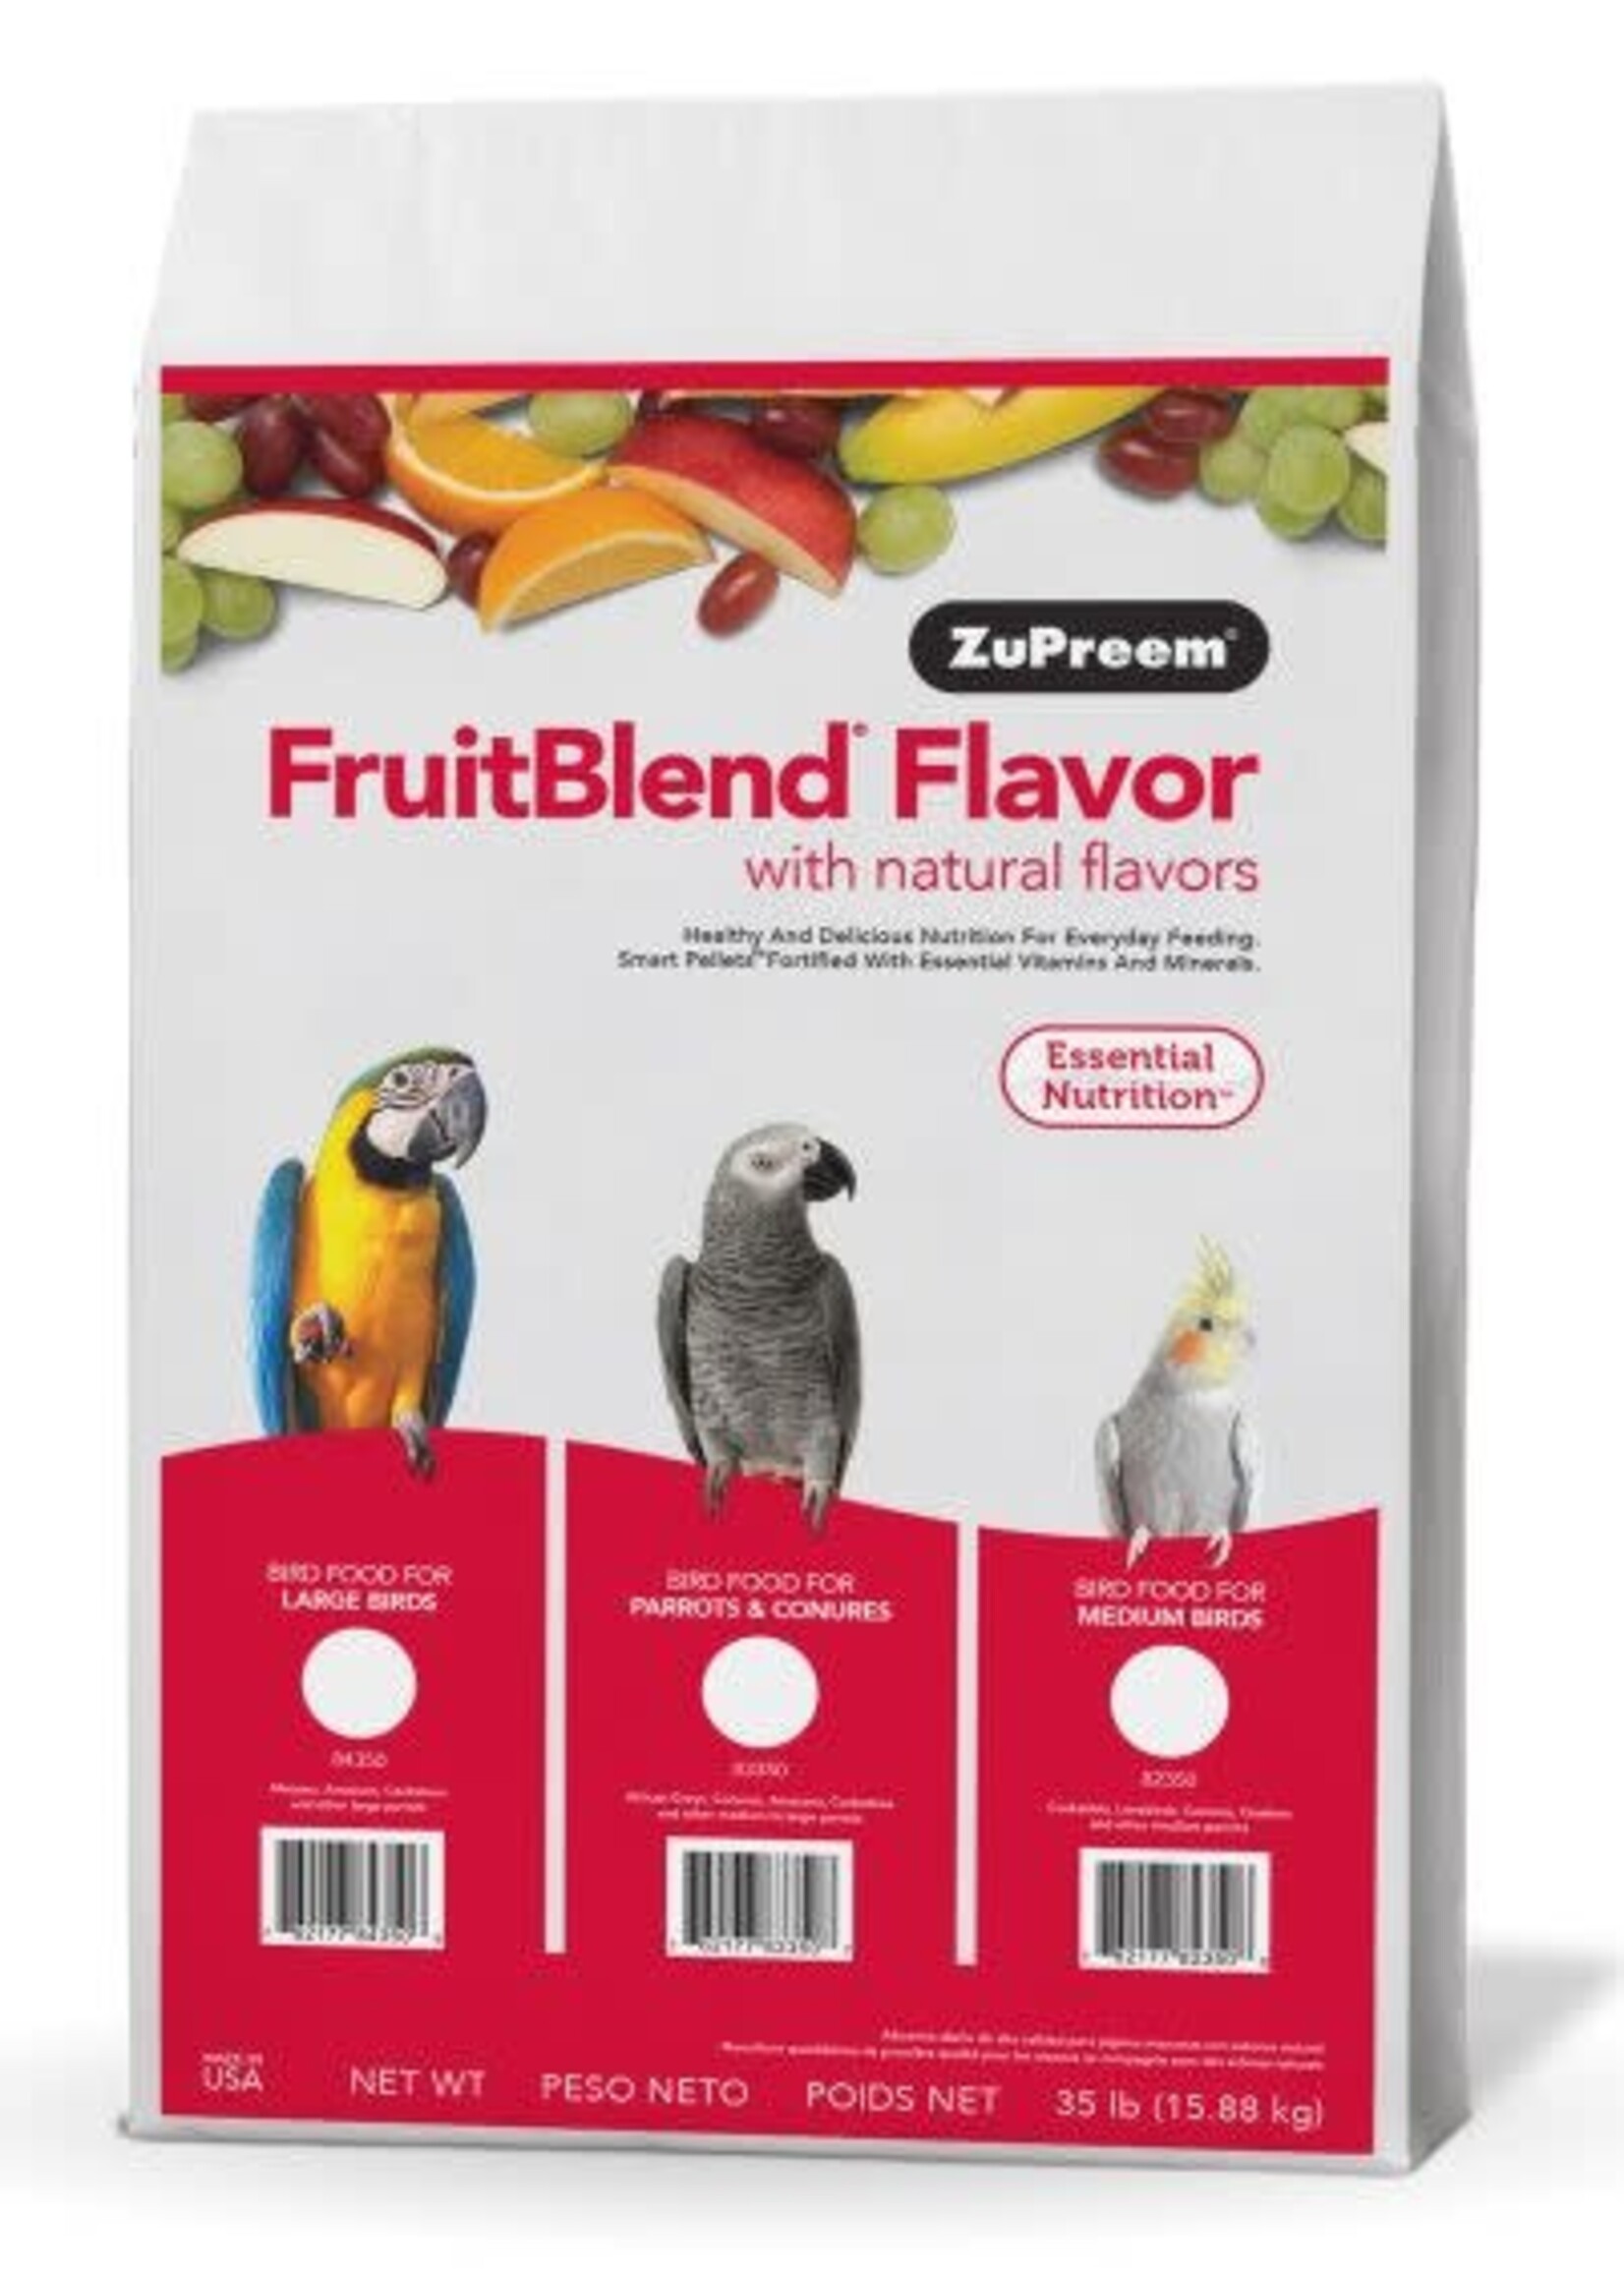 Zupreem ZuPreem "Fruitblend" Food For Parrots & Conures 35lbs 83350